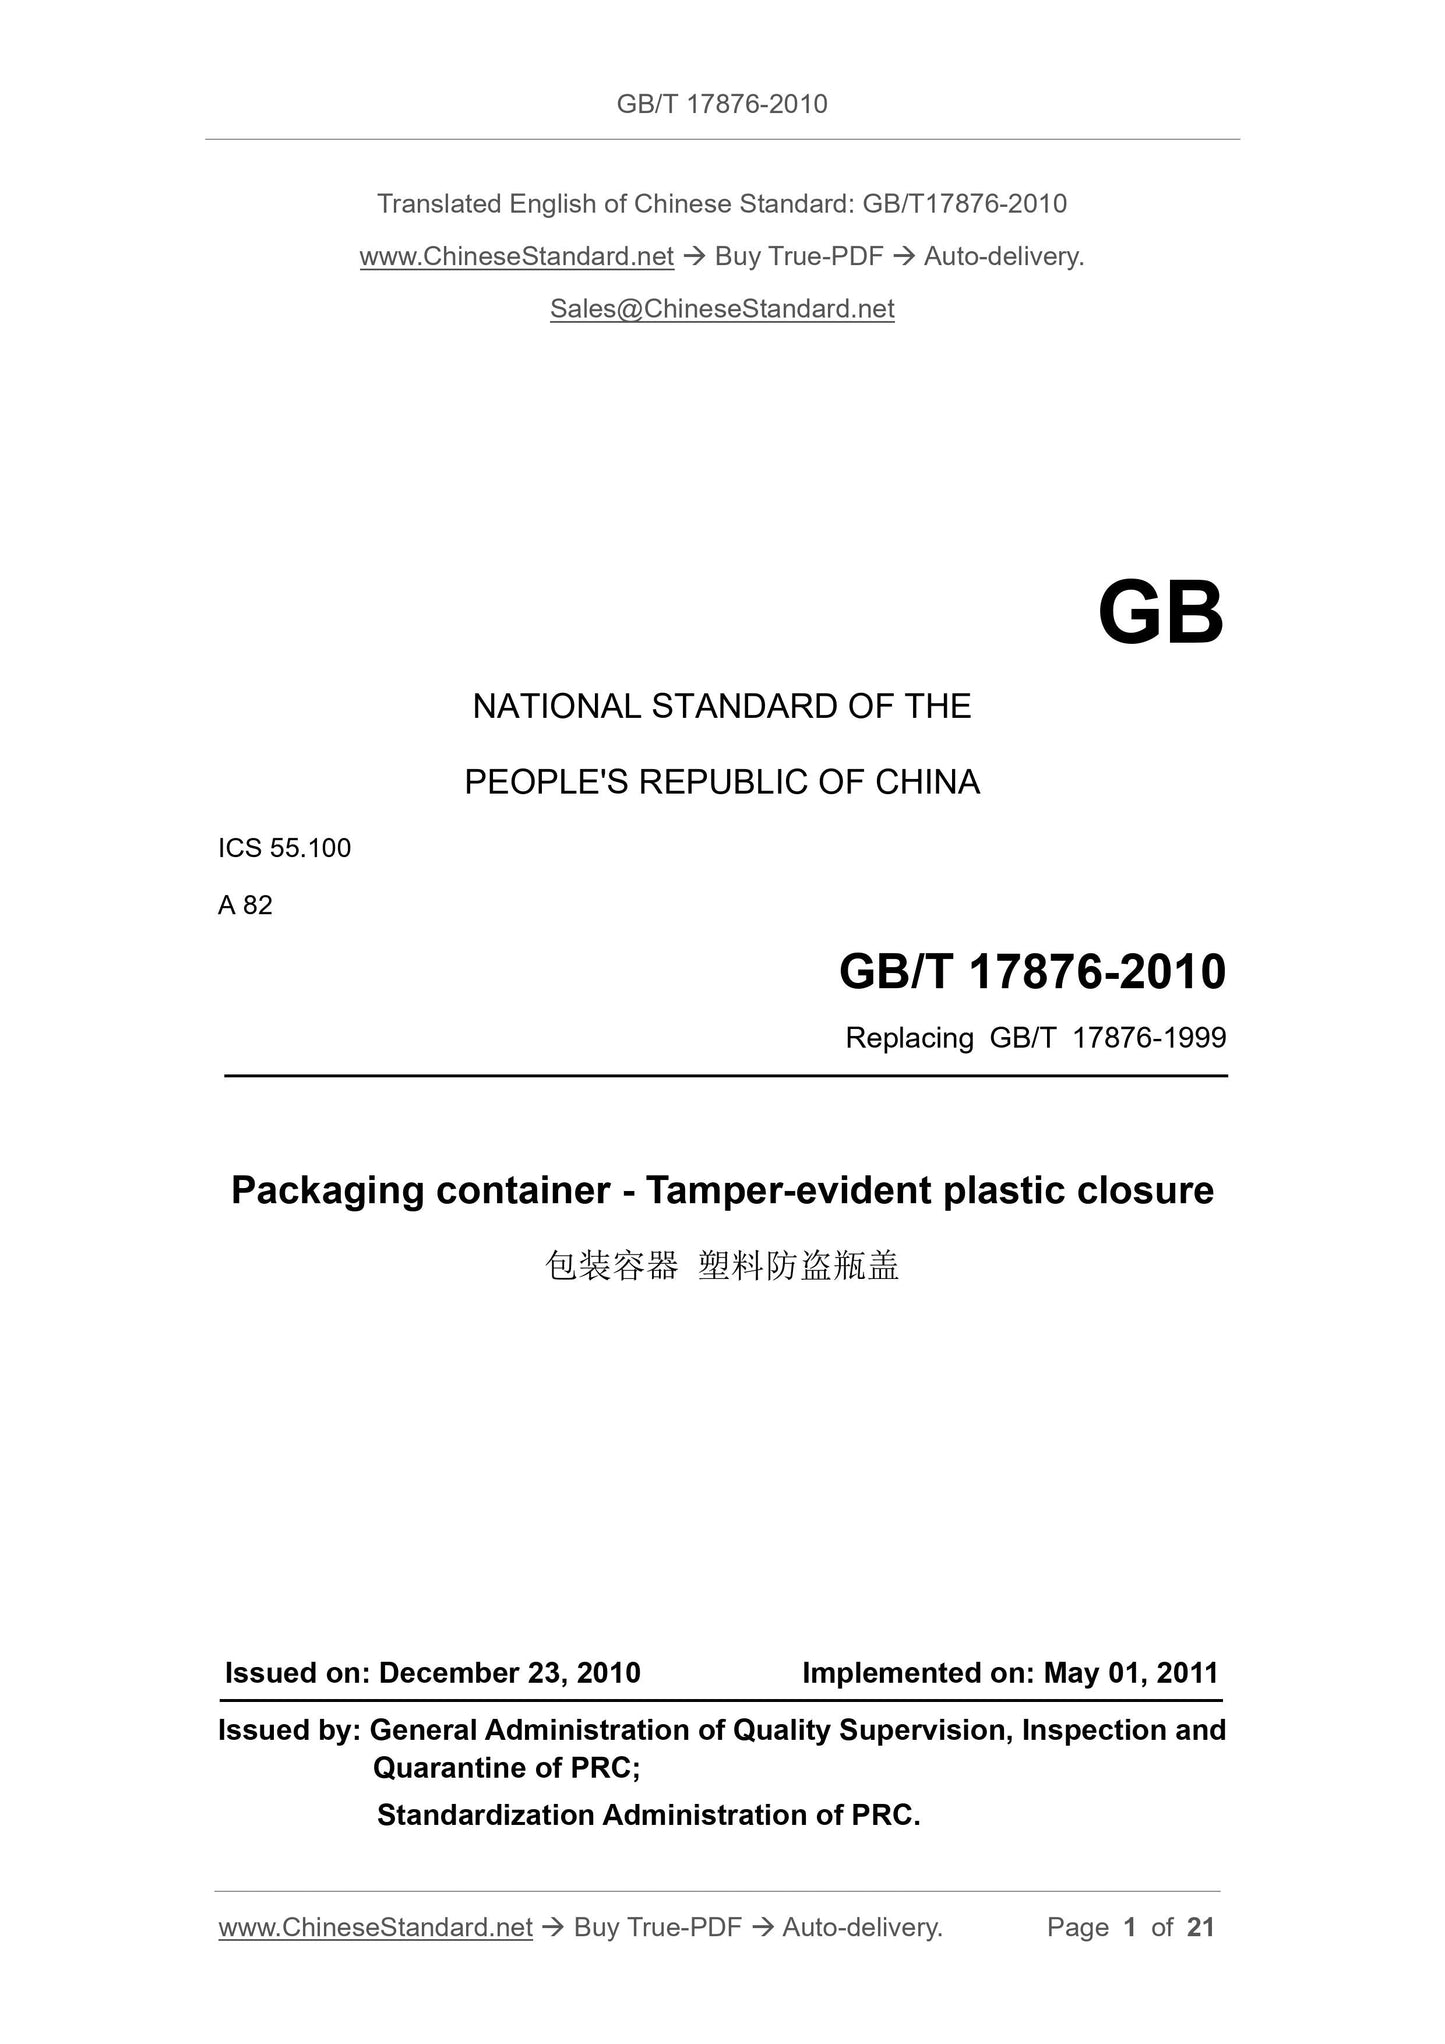 GB/T 17876-2010 Page 1